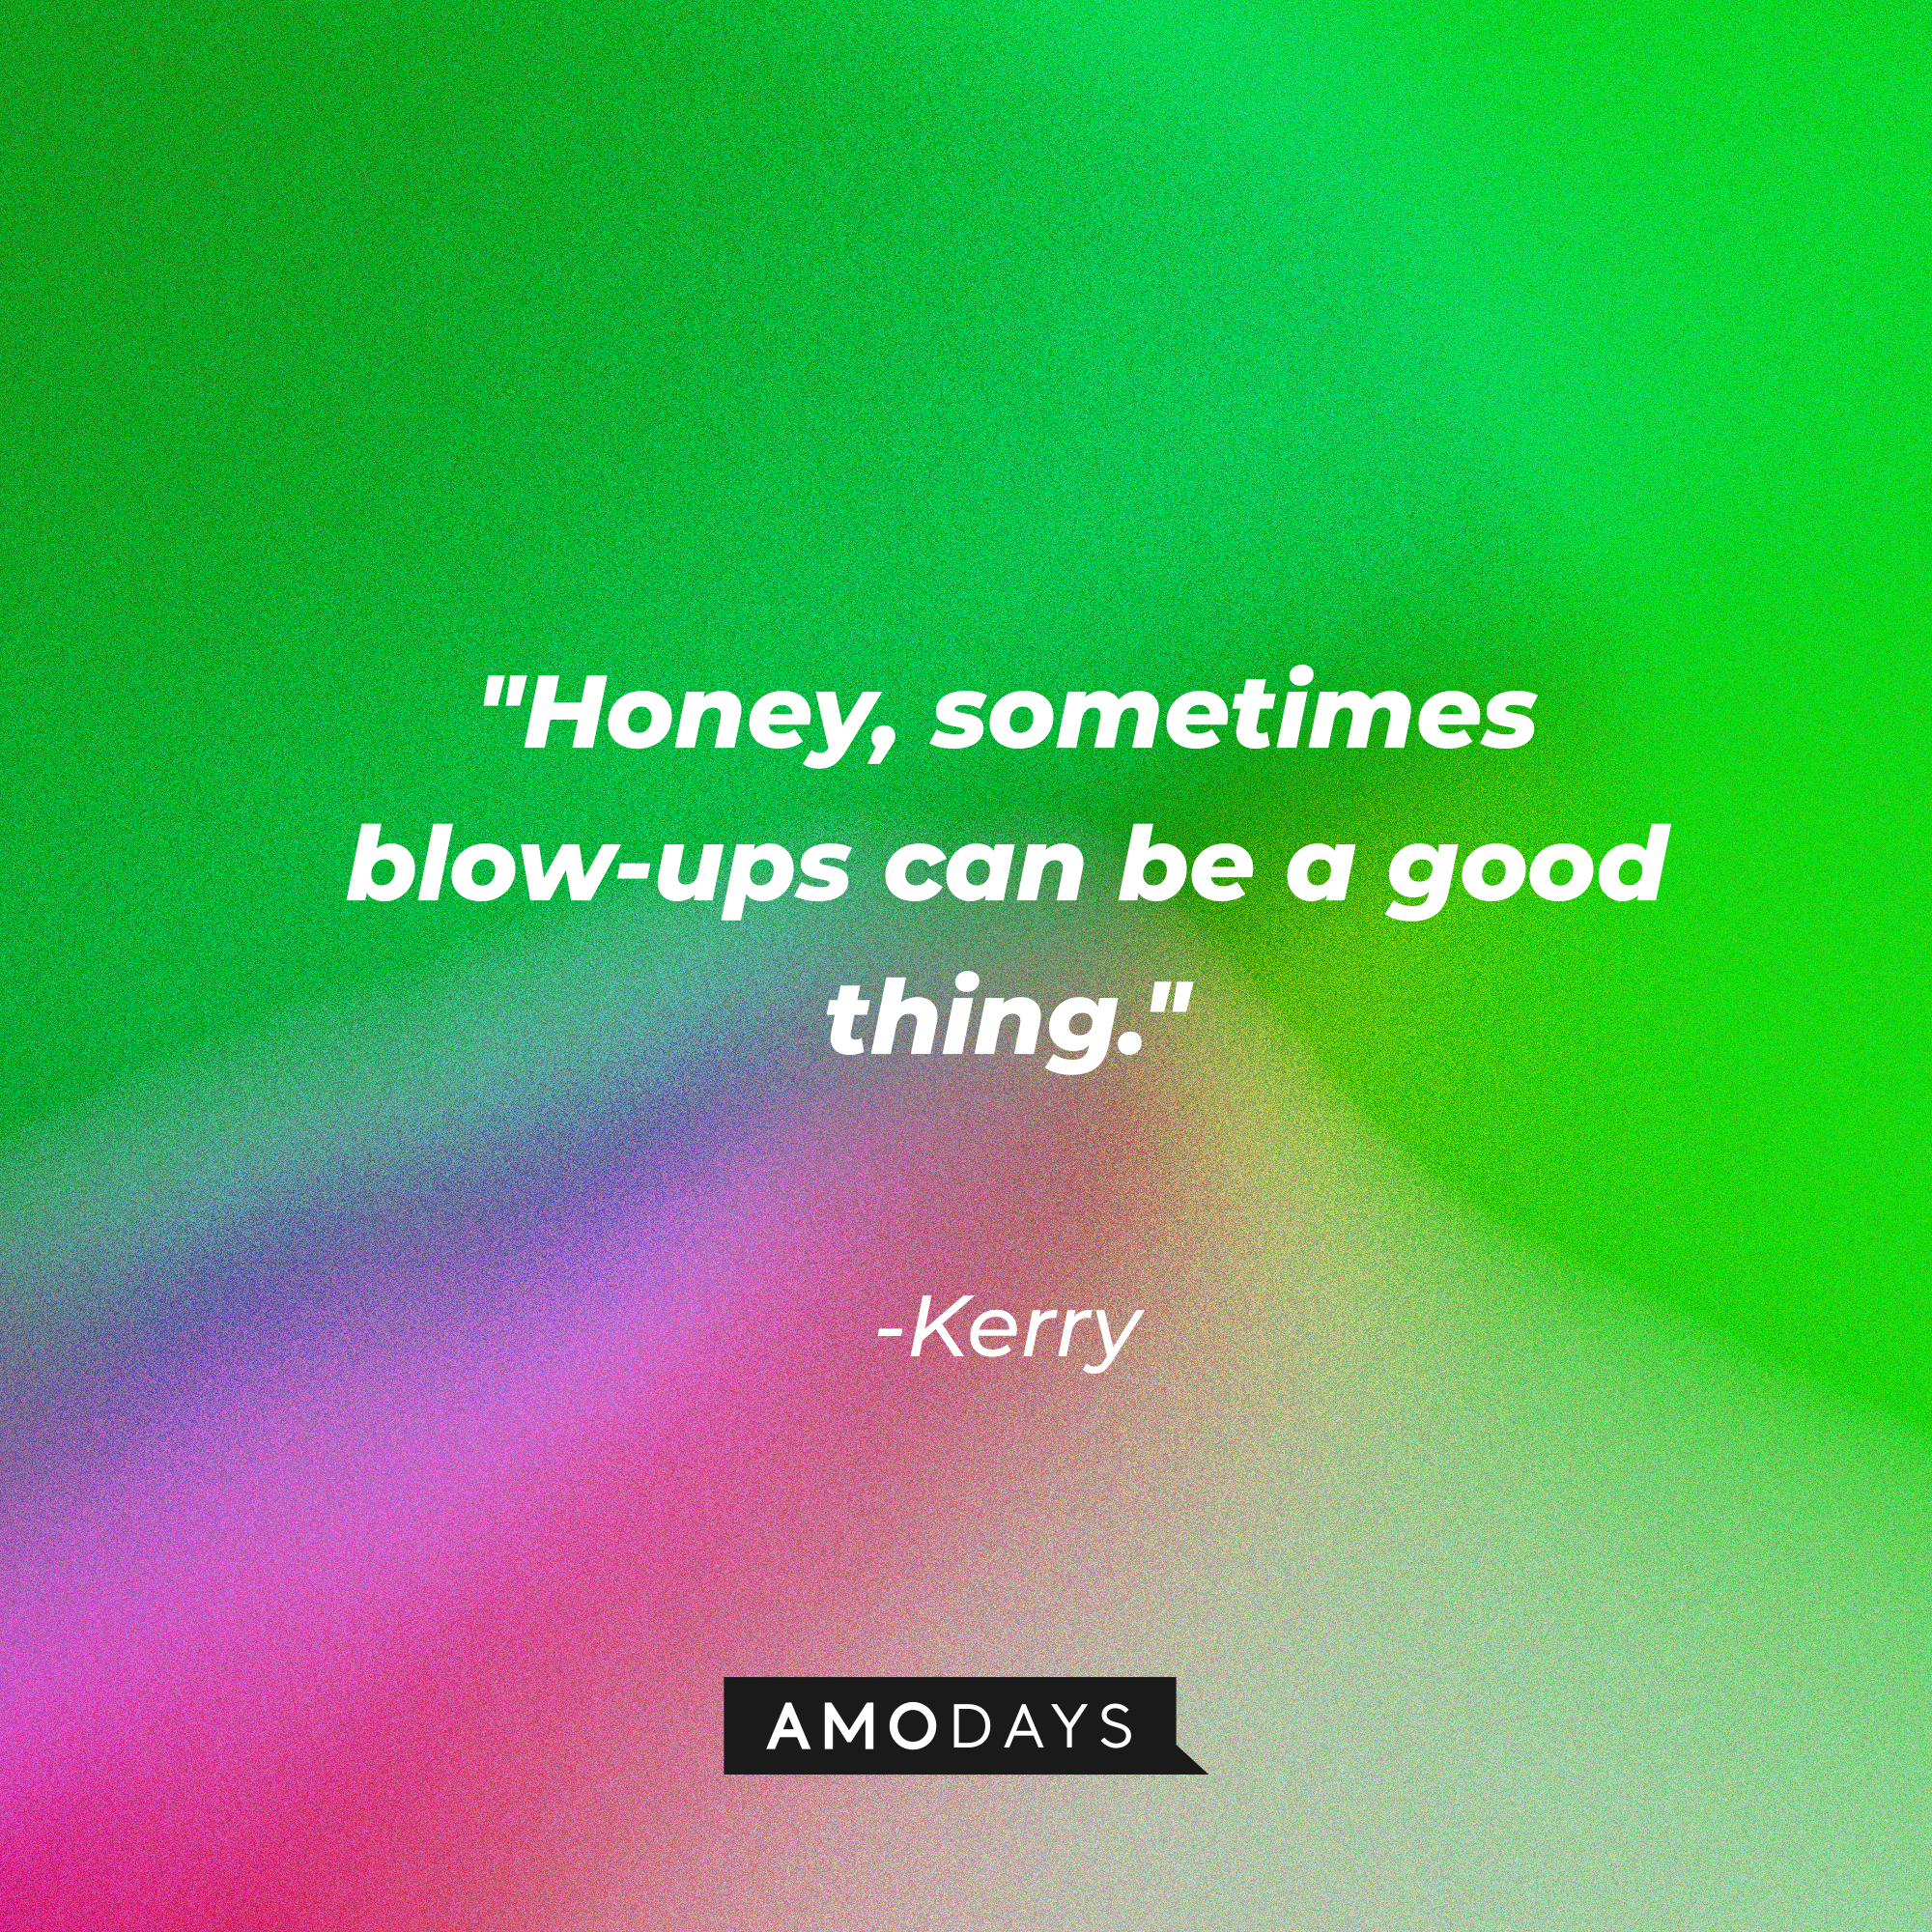 Kerry’s quote: "Honey, sometimes blow-ups can be a good thing." | Source: AmoDays